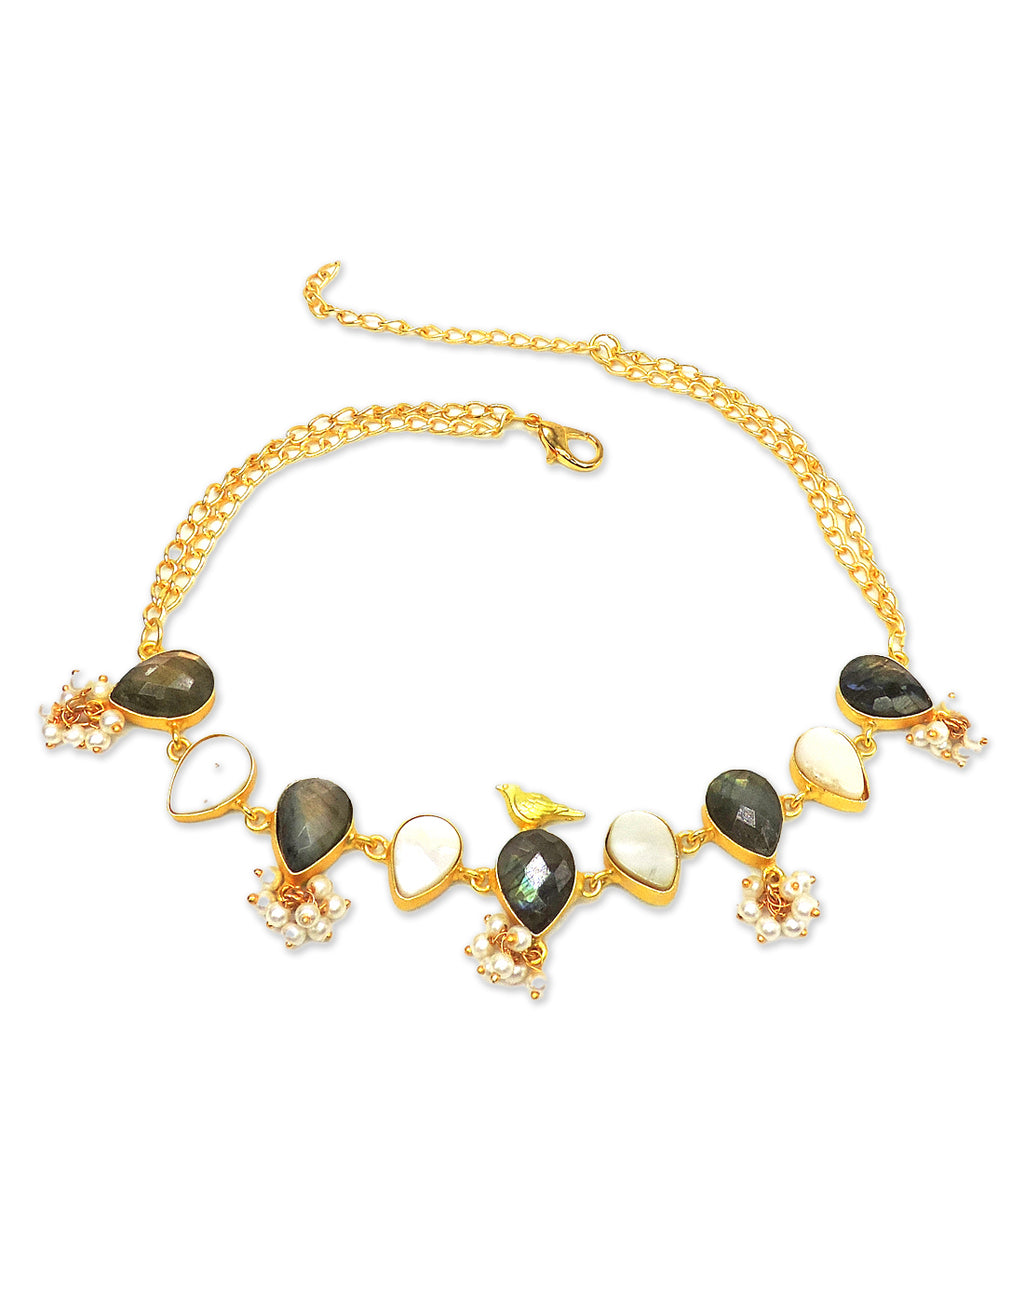 Labradorite & Pearl Necklace - Statement Necklaces - Gold-Plated & Hypoallergenic Jewellery - Made in India - Dubai Jewellery - Dori